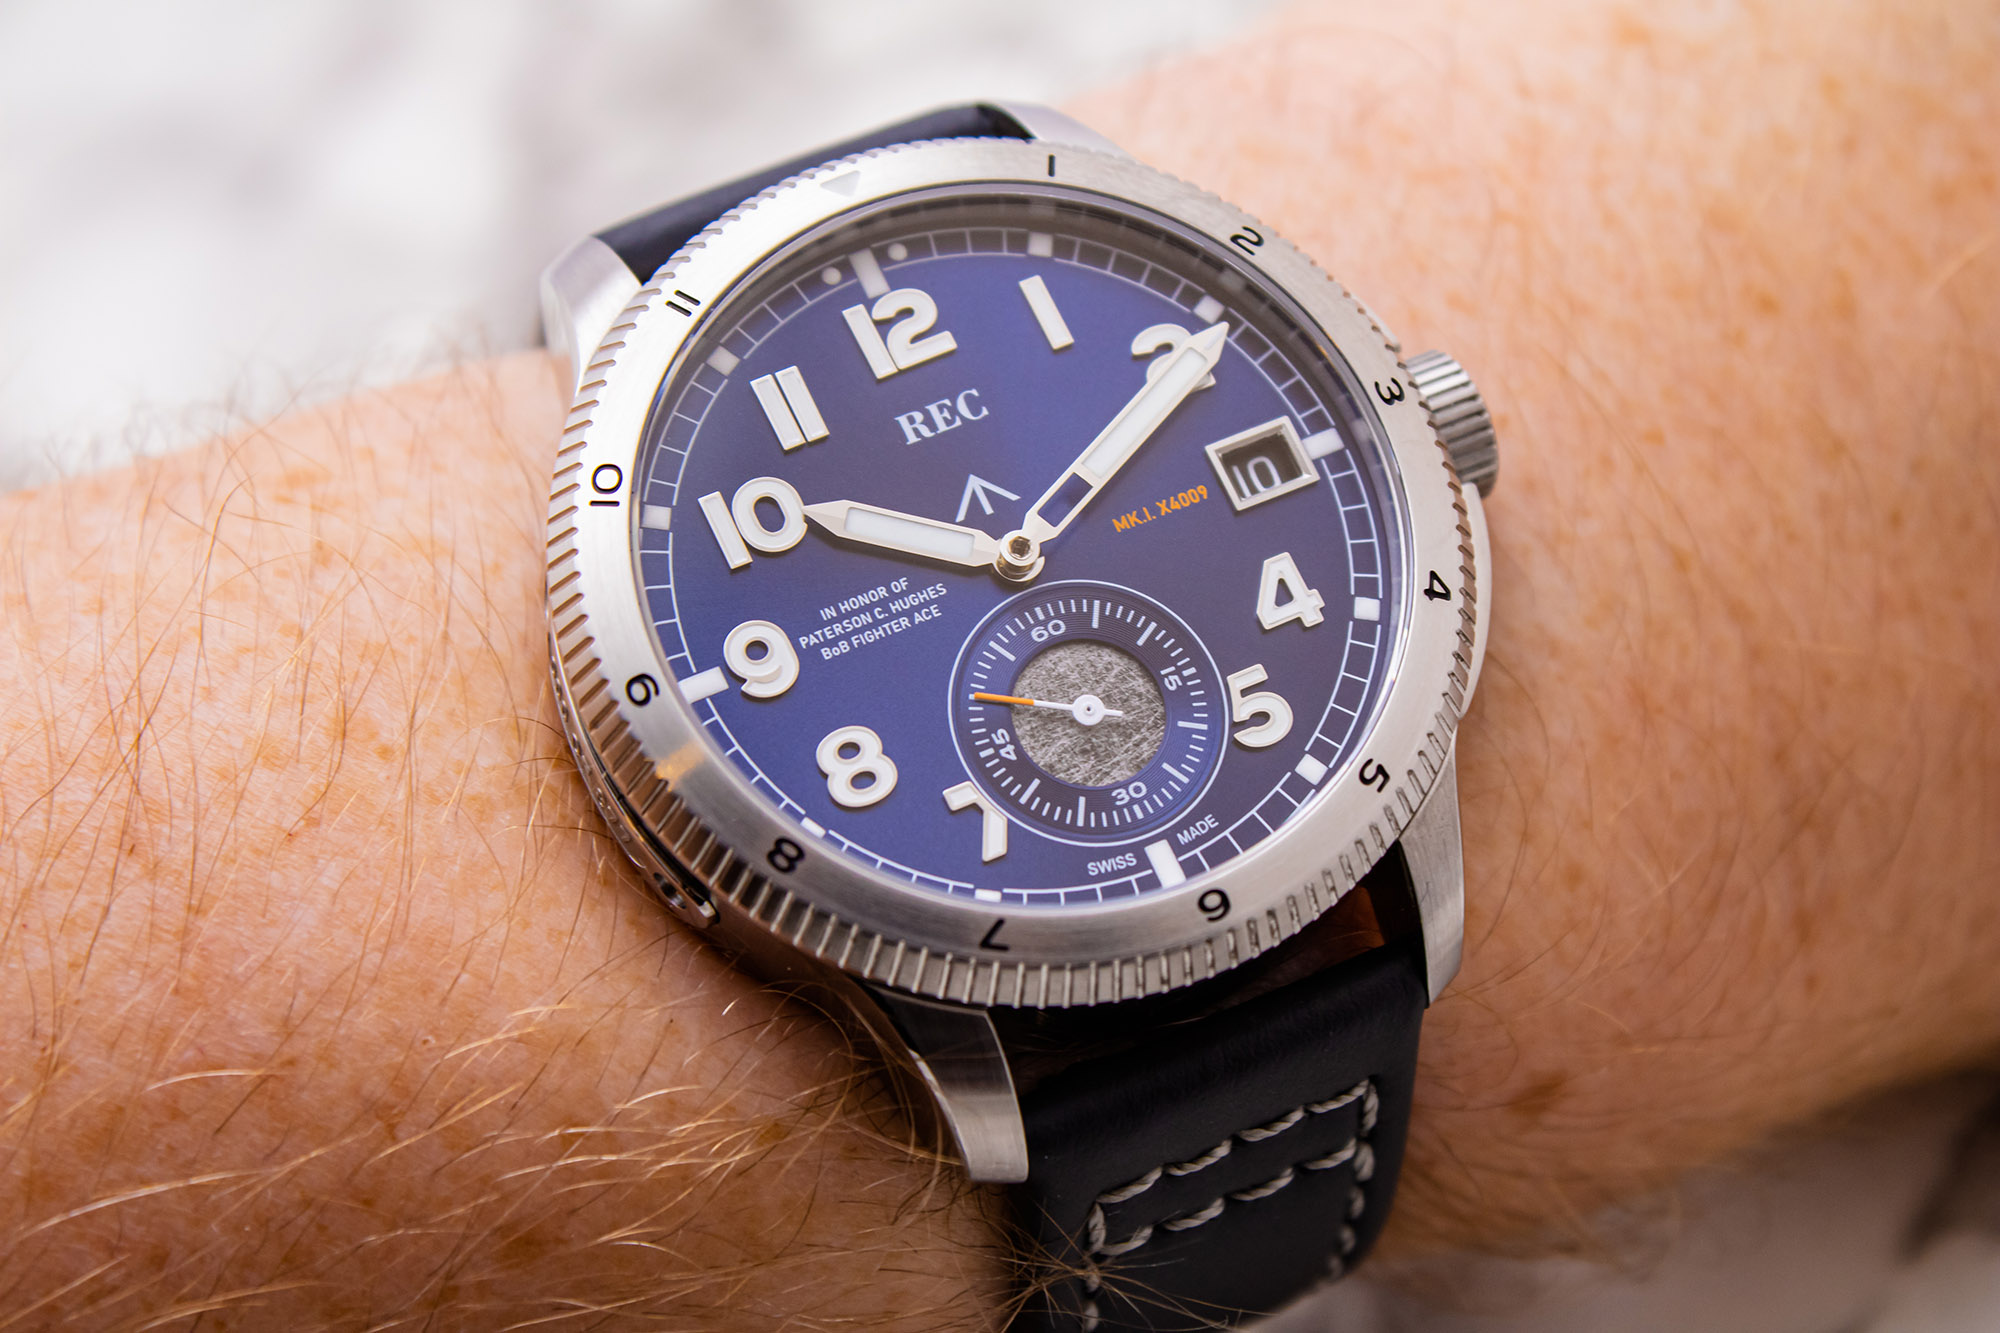 Watch Review: Limited-Edition REC X4009 Series